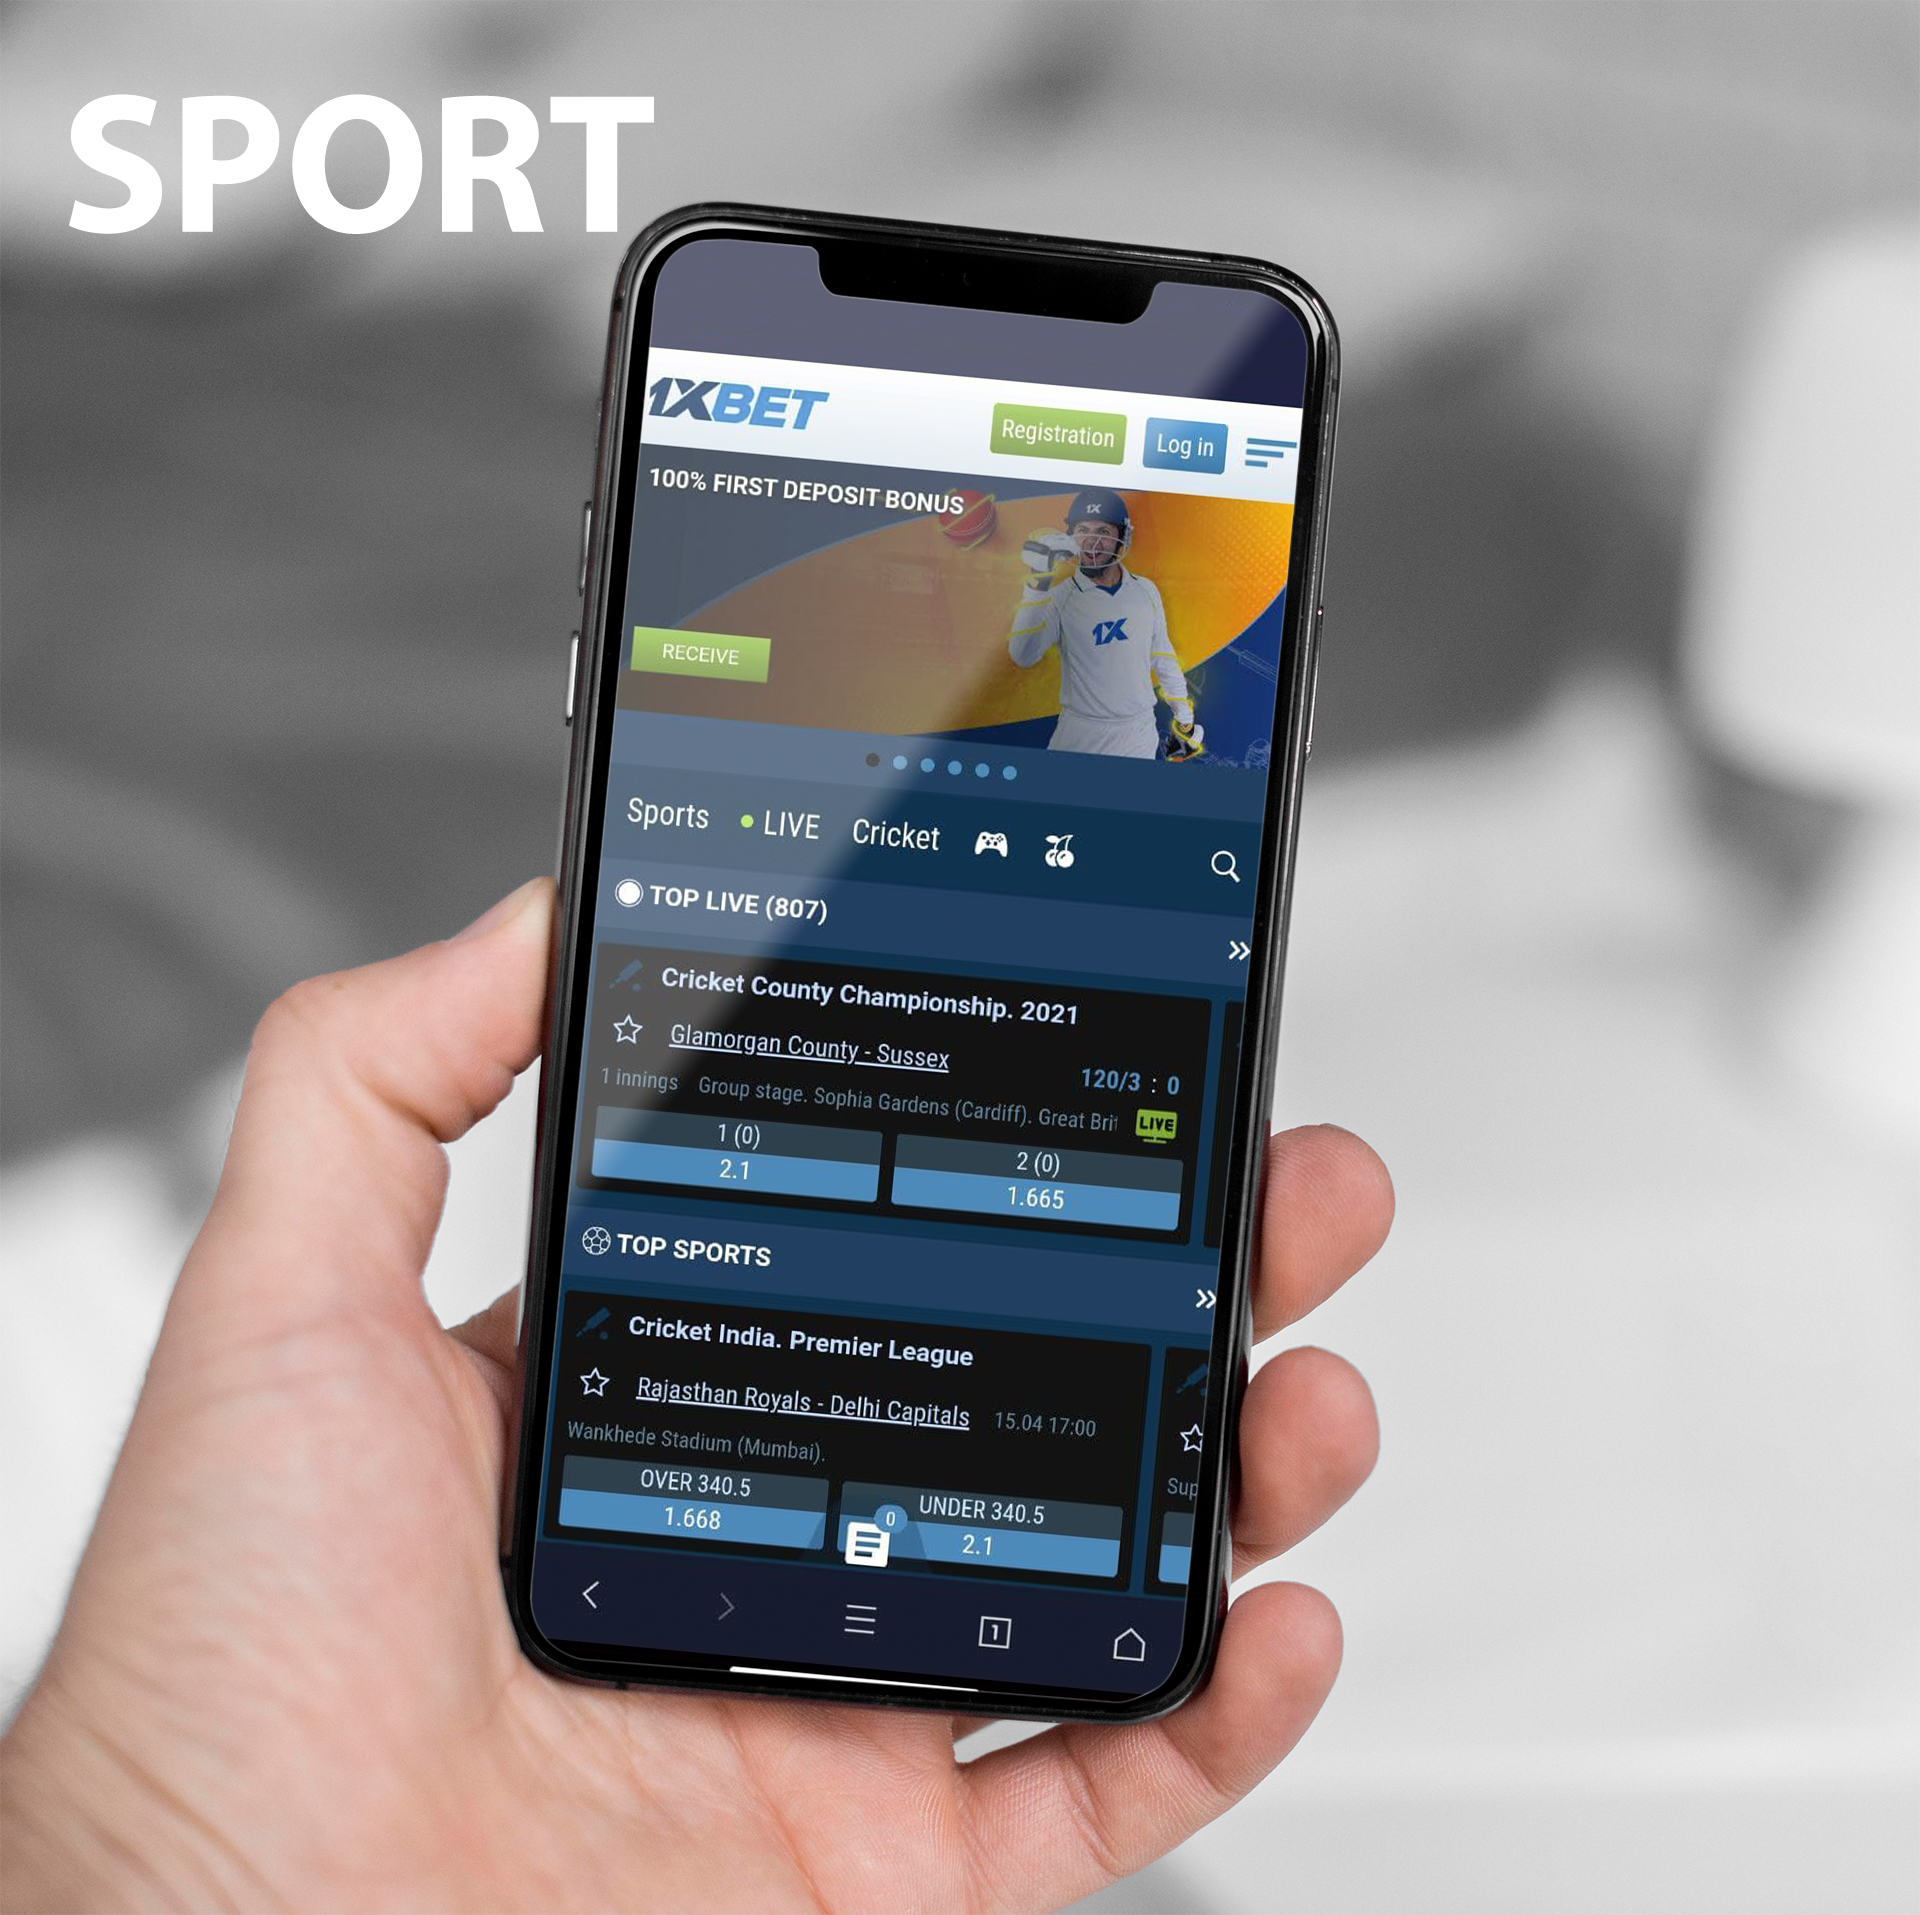 1xbet offers a long list of the sports events to bet on.